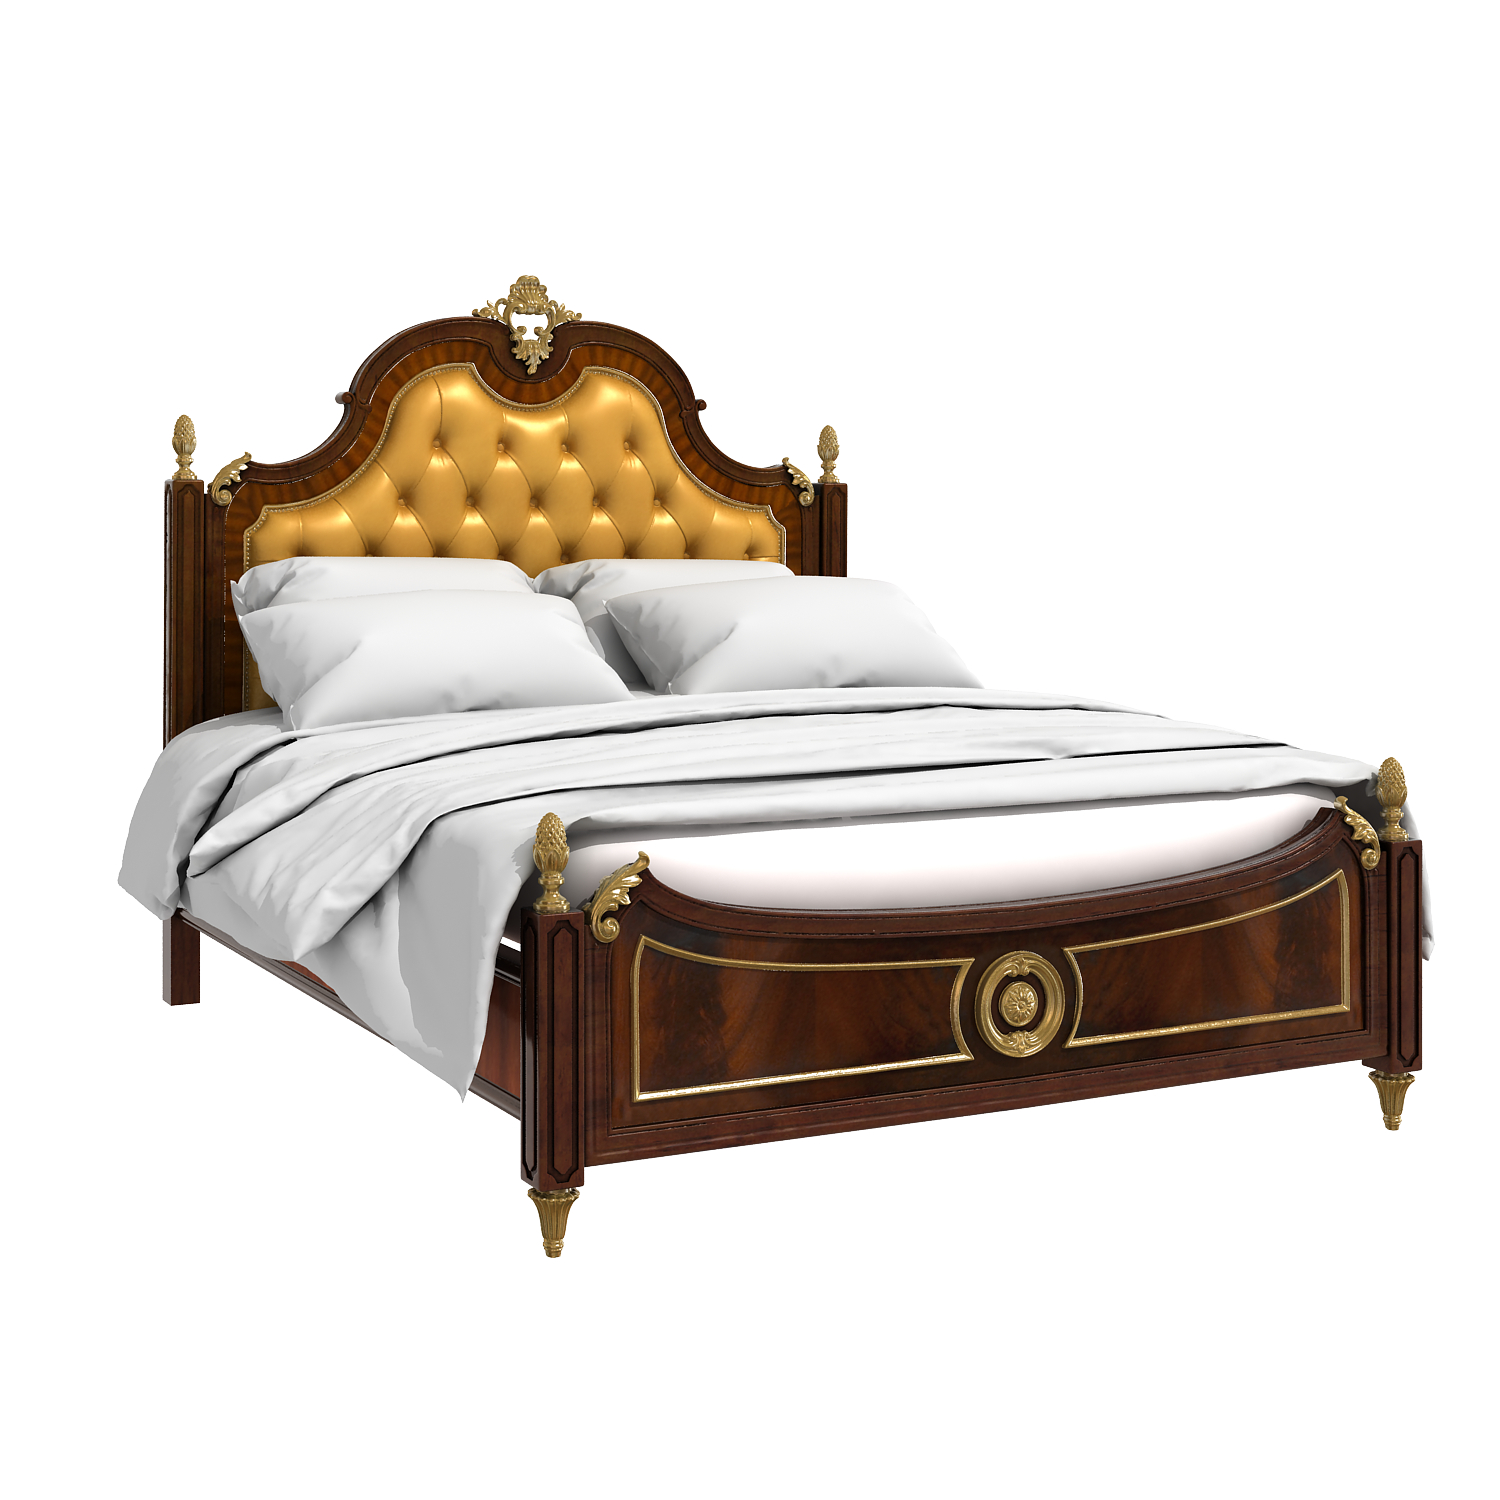 3D Bed Classic Model 40 Free Download